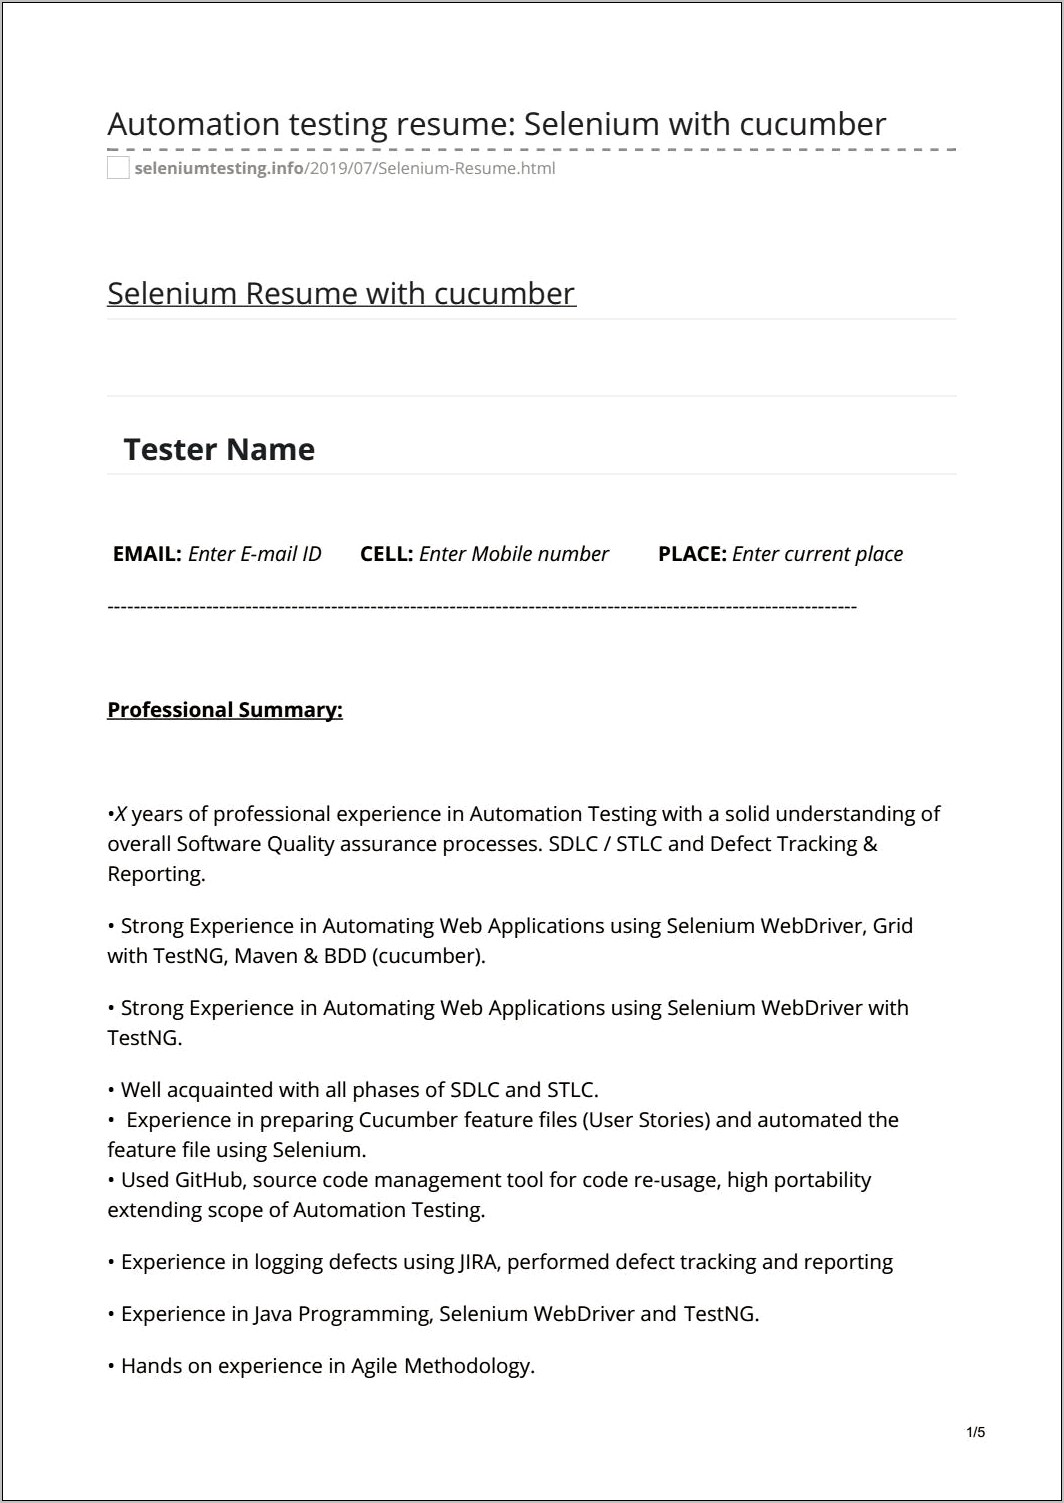 Automation Testing Resume For 5 Years Experience